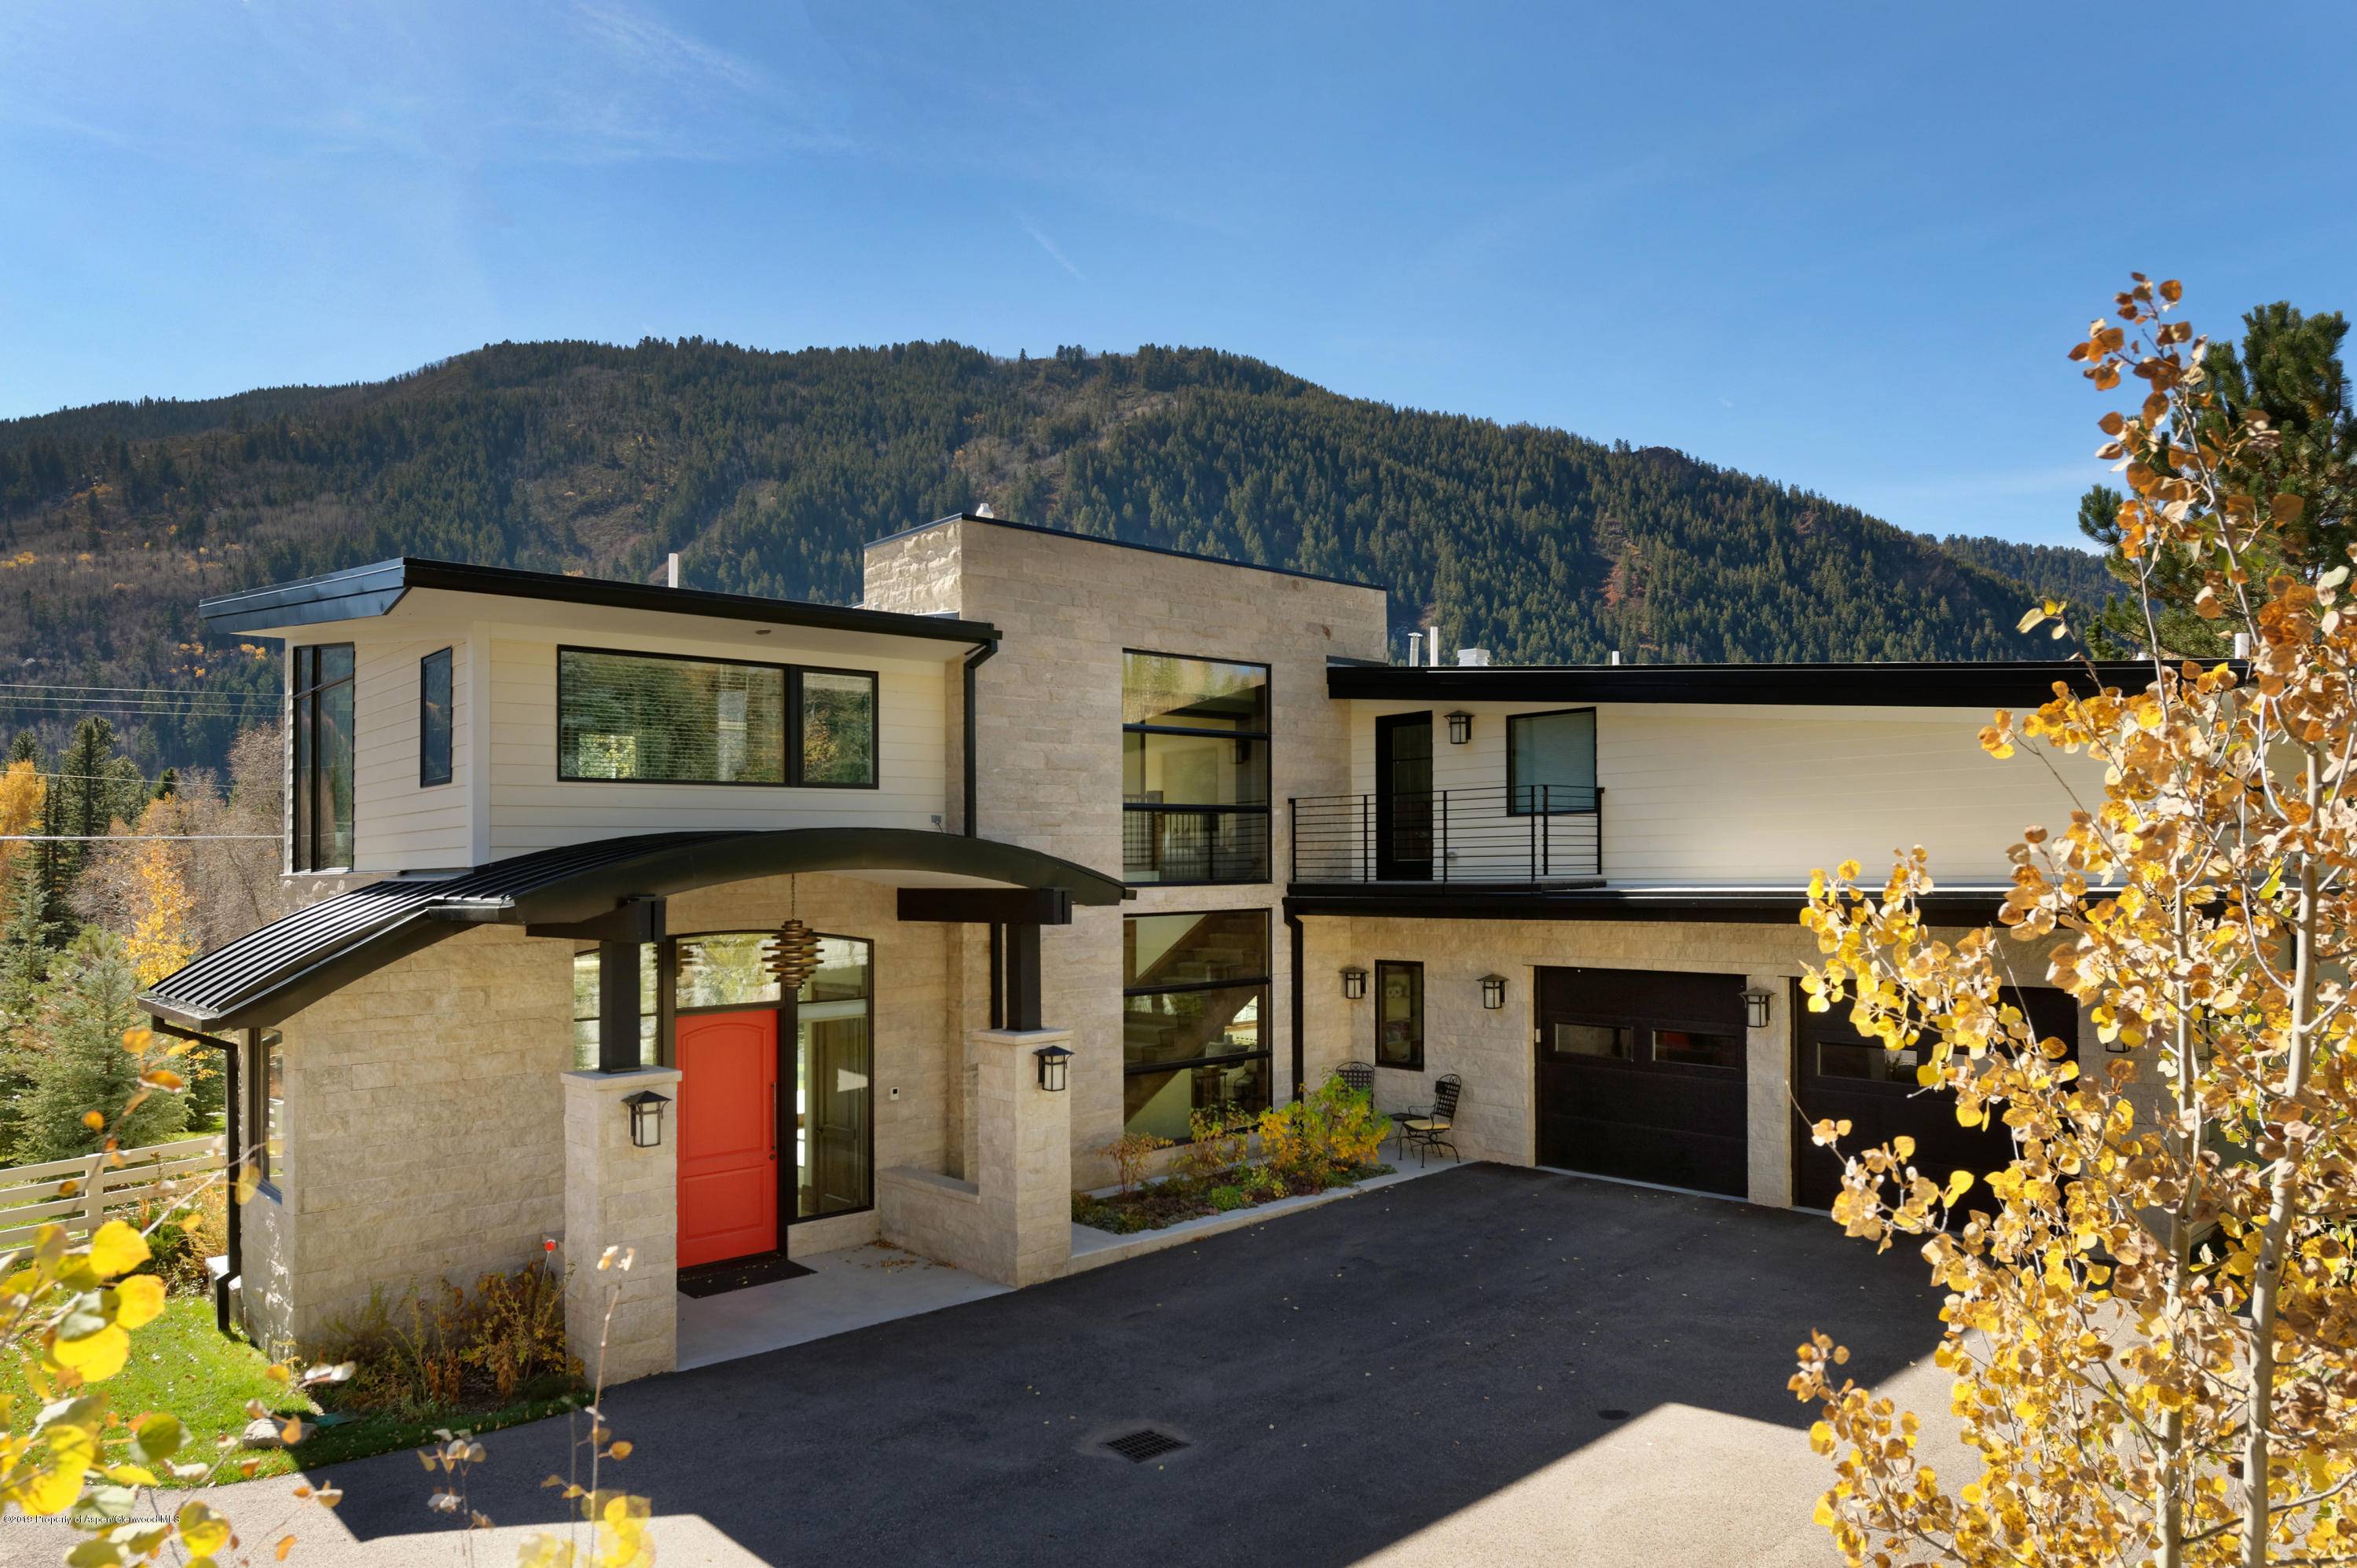 This contemporary East Aspen home is now available for rent for the first time.